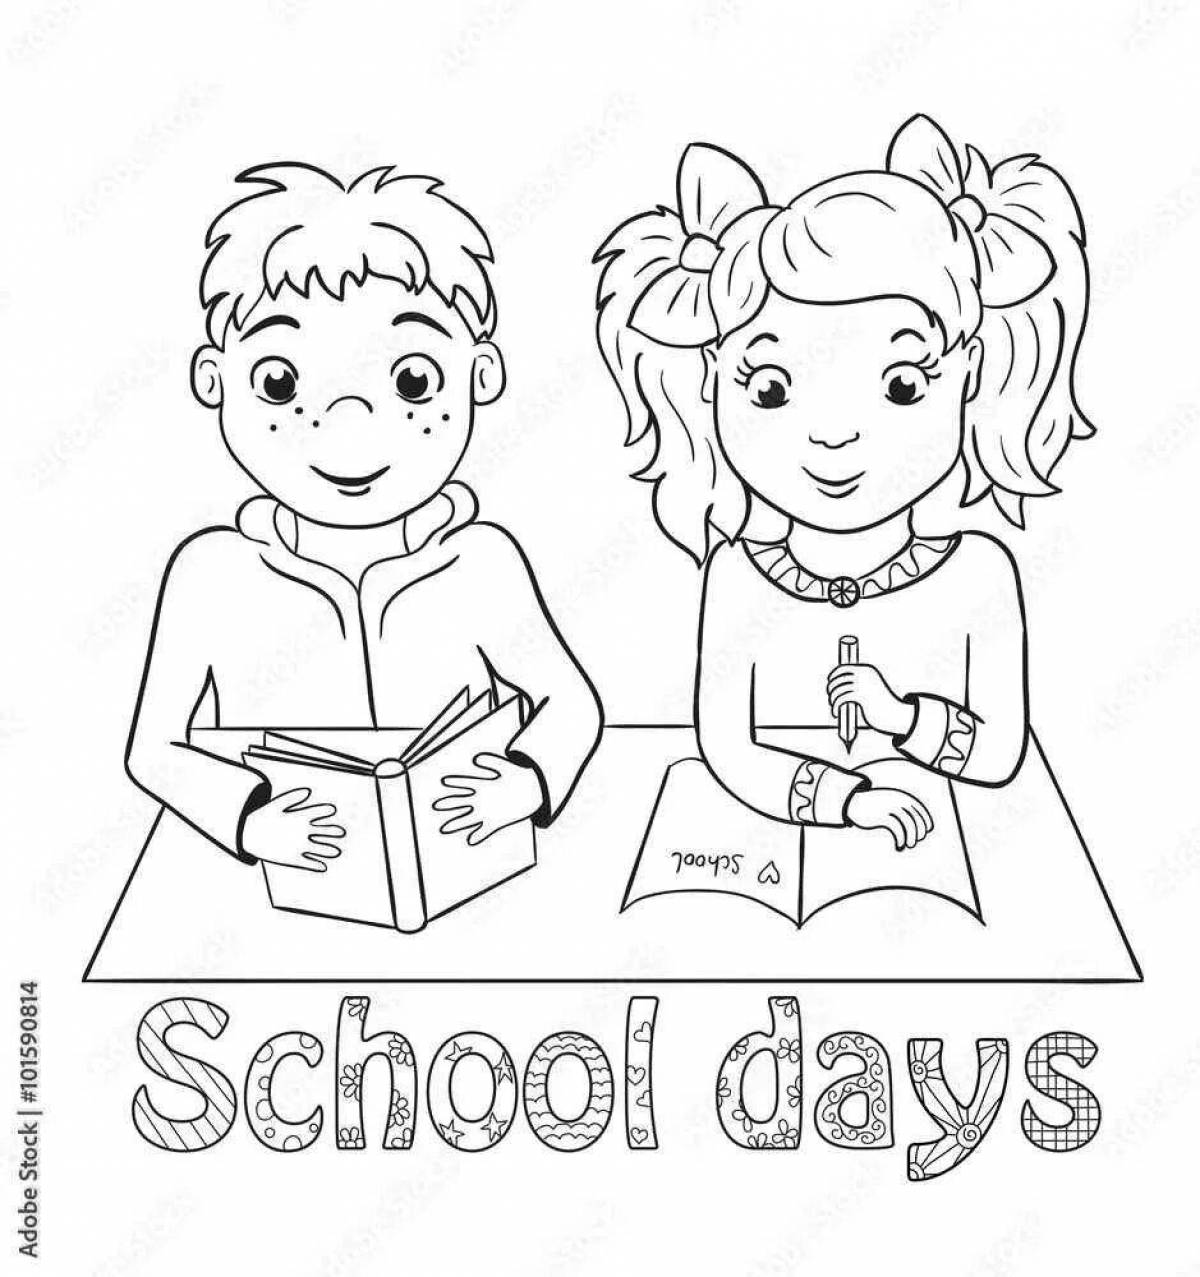 Playful school desk coloring page